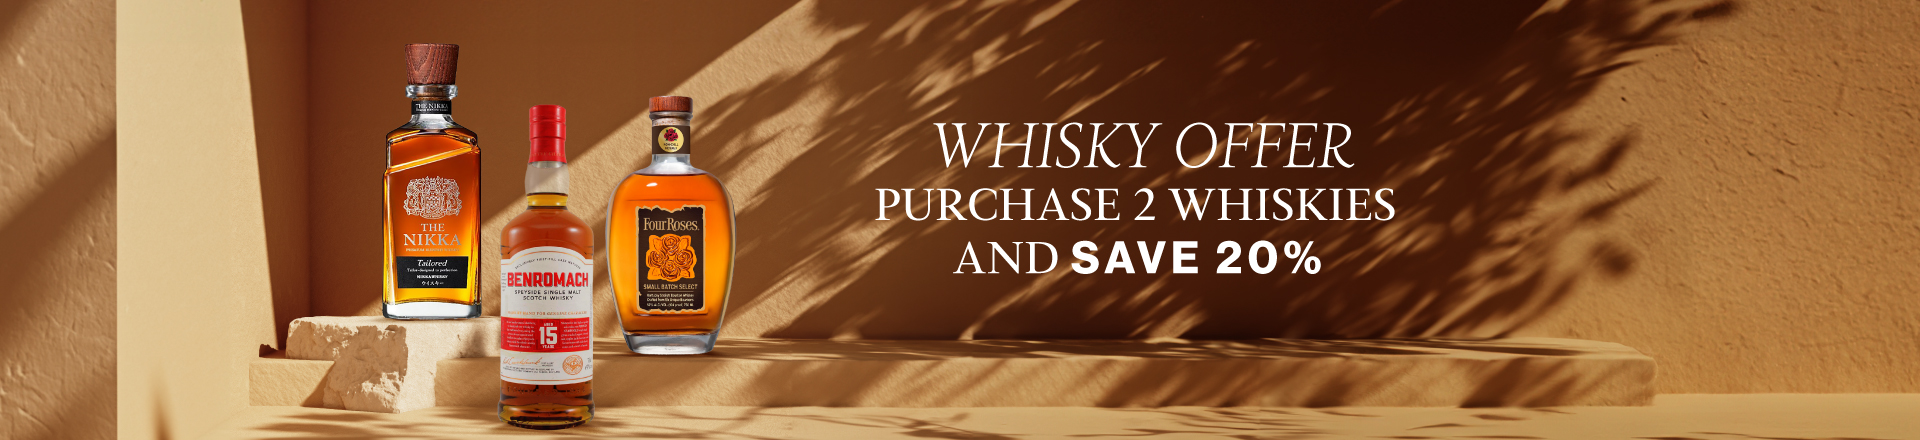 Le Clos Whisky promo_banners-01